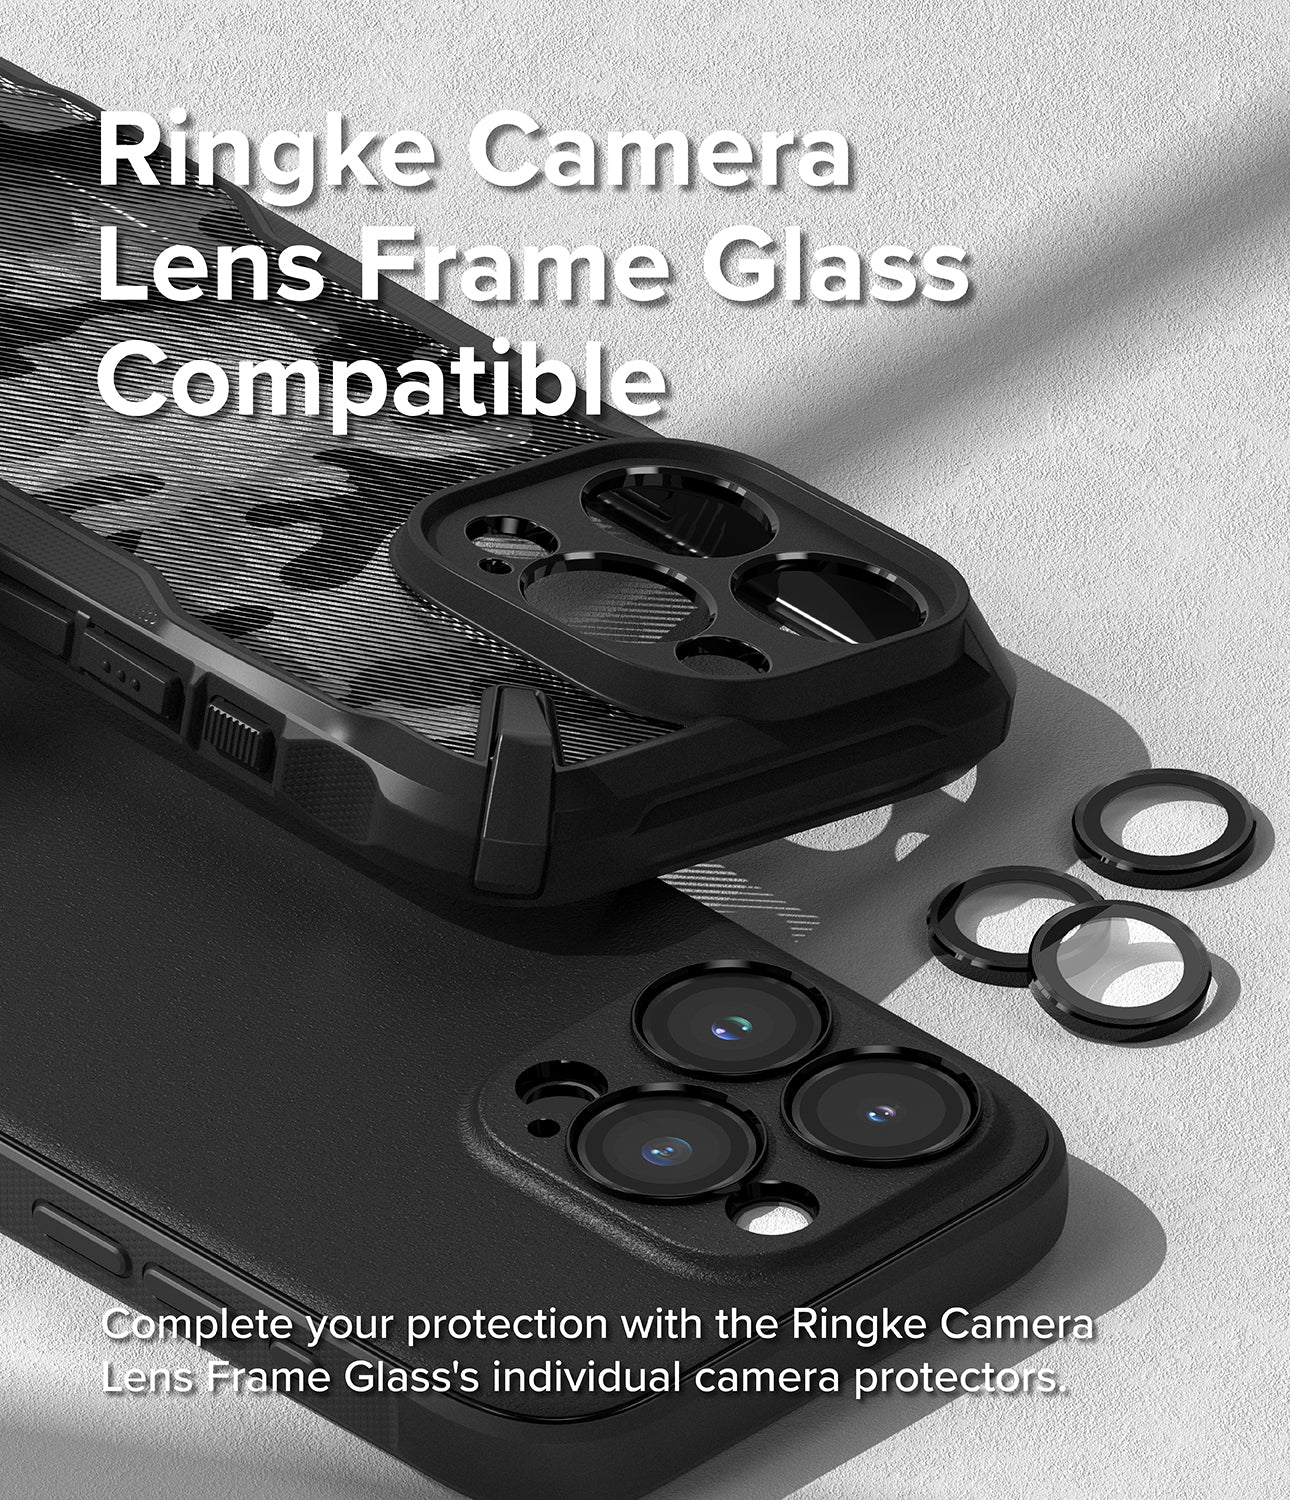 iPhone 15 Pro Max Case | Onyx - Black - Ringke Camera Lens Frame Glass Compatible. Complete your protection with the Ringke Camera Lens Frame Glass' individual camera protectors.